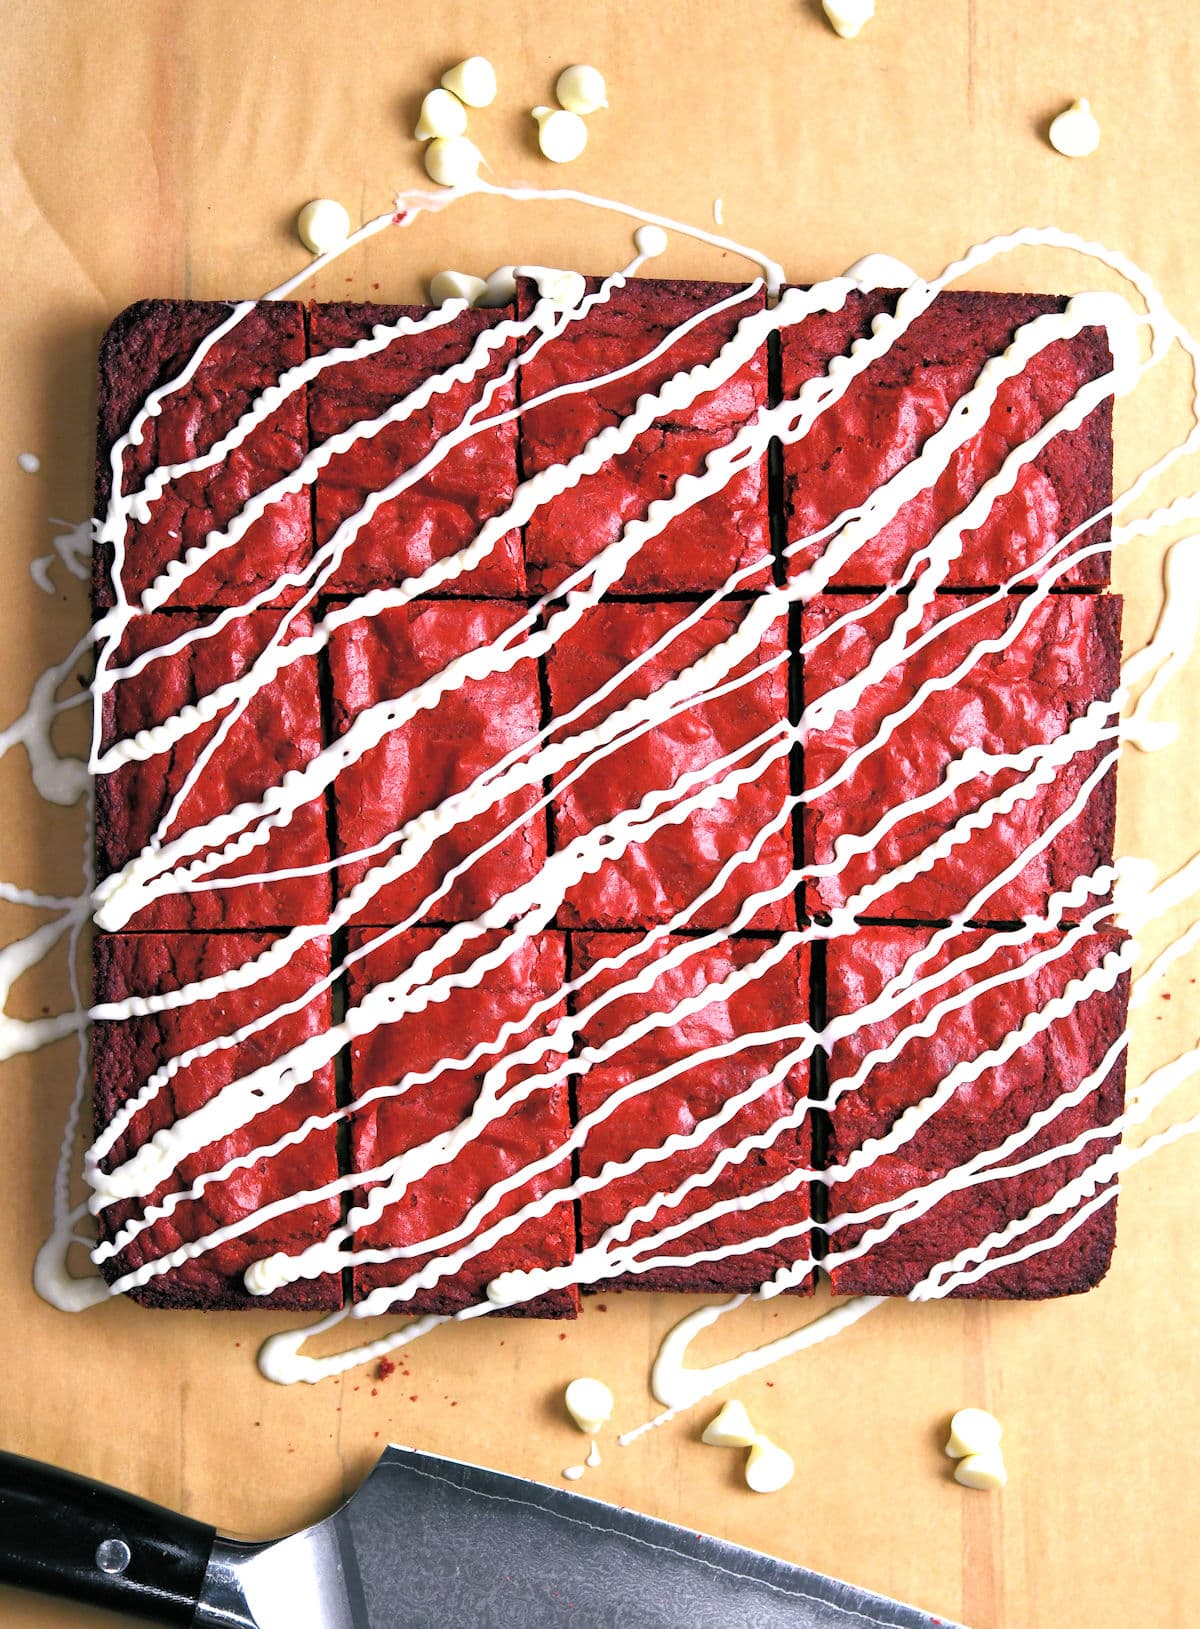 Red velvet brownies on a parchment paper, cut into 9 pieces 